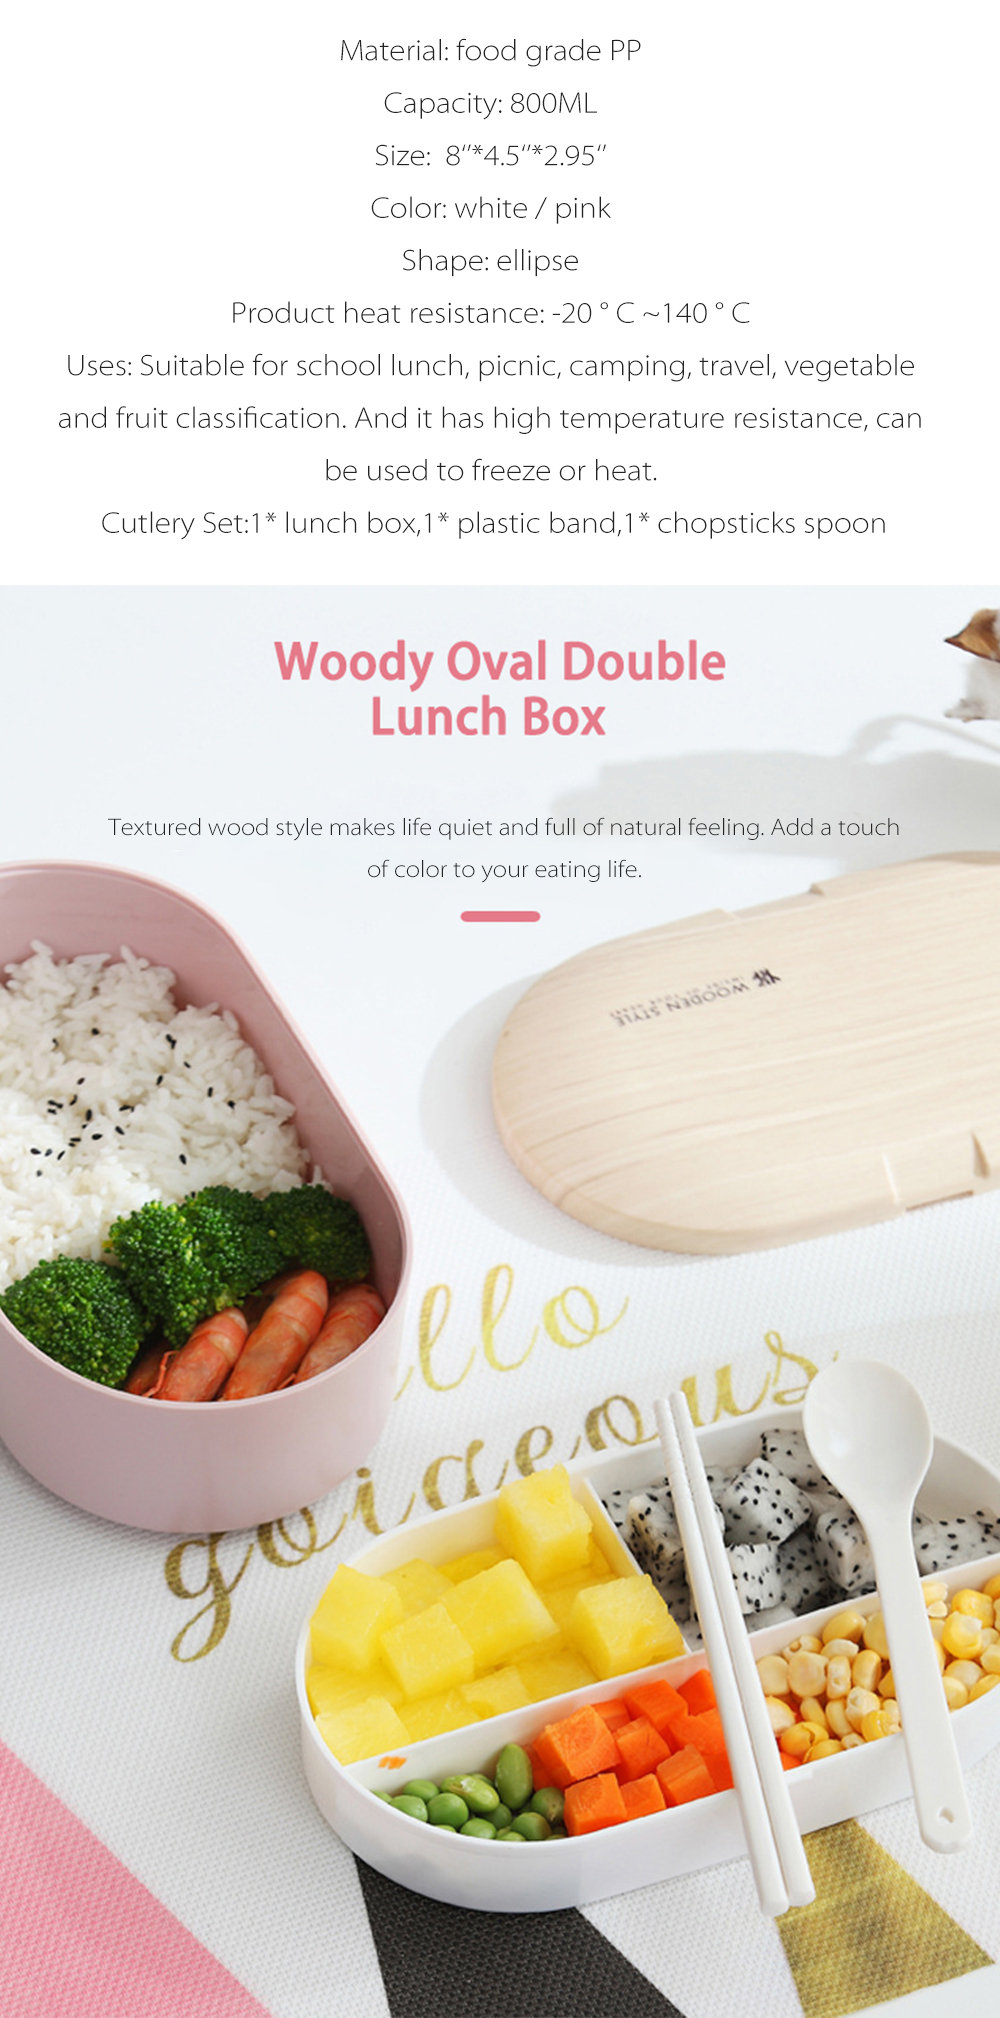 Bento Sandwich Box - Take Your Lunch - For Kids And Adults - ApolloBox